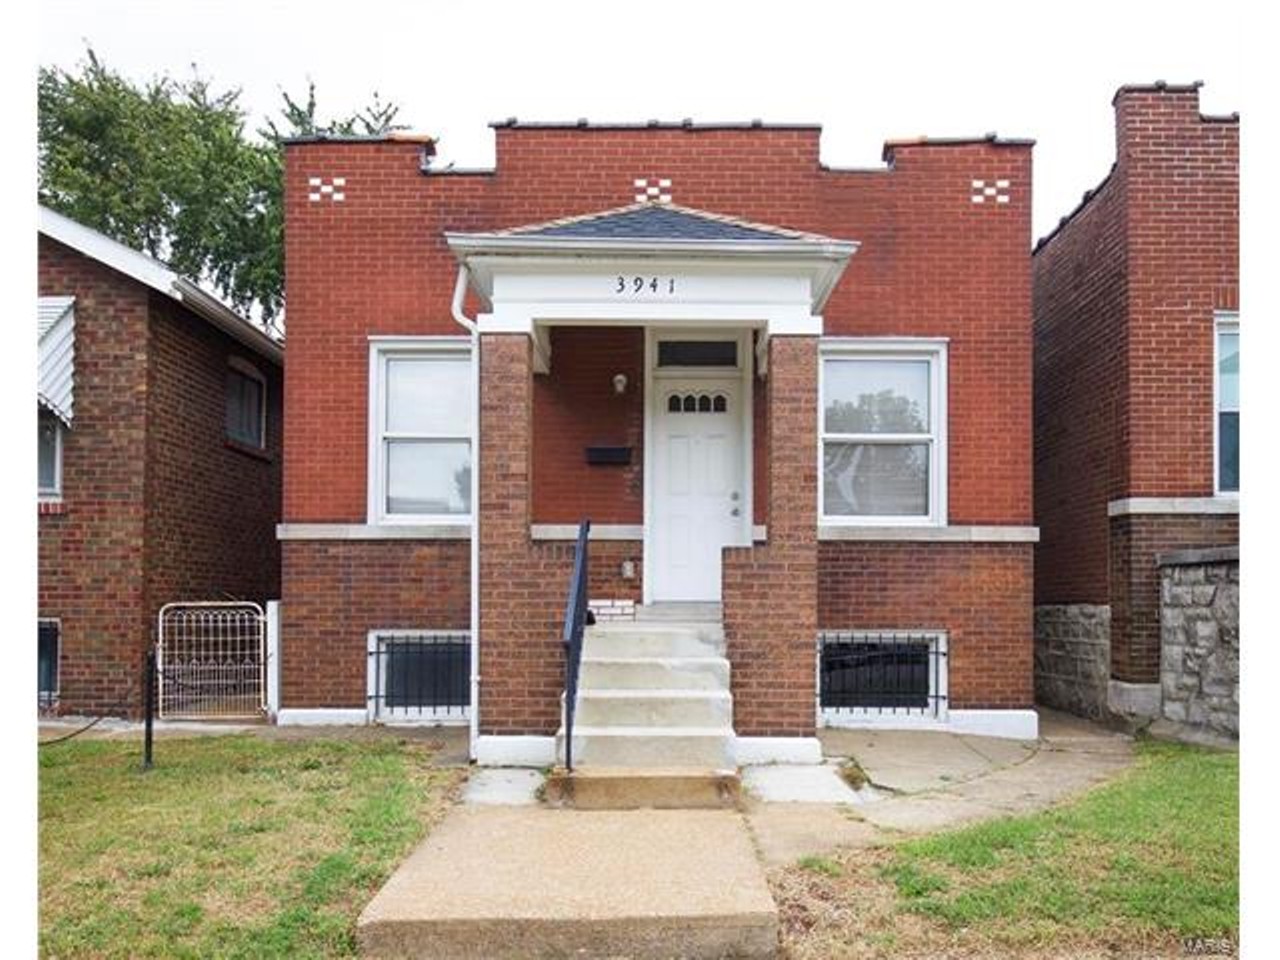 3941 Winnebago
St Louis, MO 63116
2 beds, 1 bath, 783 sqft
$95,000
Nestled in Tower Grove South, this home has been "rehabbed from roof to basement." There's a bonus sunroom, a walk-out lower level, a back porch and a one-car garage in addition to standard rooms like the two bedrooms and kitchen (which has a new stainless steel microwave and gas stove, by the way). The listing also notes how close the house is to Civil Life Brewery -- absolutely no complaints there.